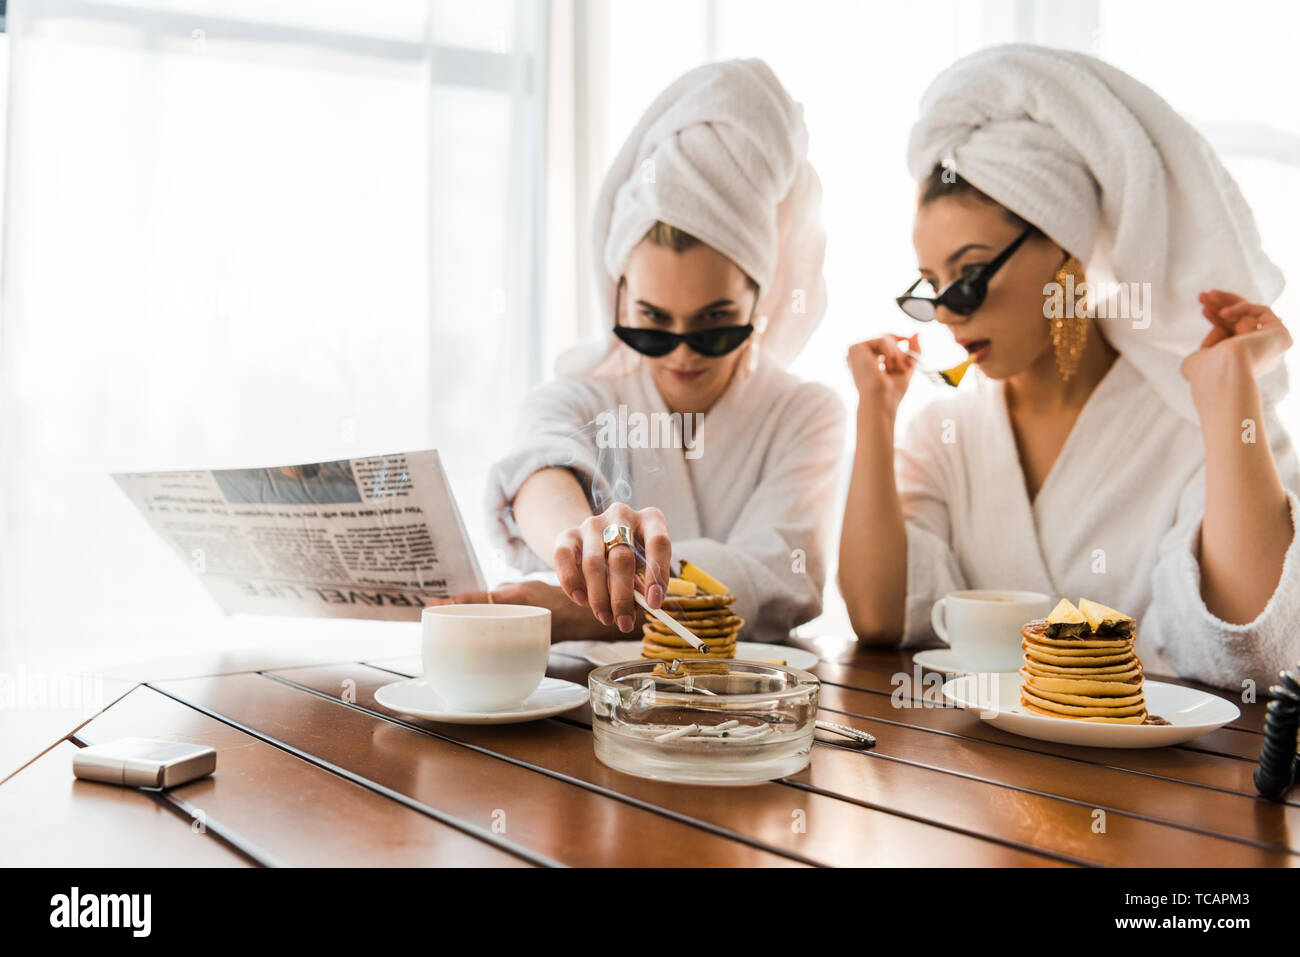 selective focus of stylish women in bathrobes, sunglasses and jewelry with towels on heads smoking cigarette and reading newspaper while eating pancak Stock Photo